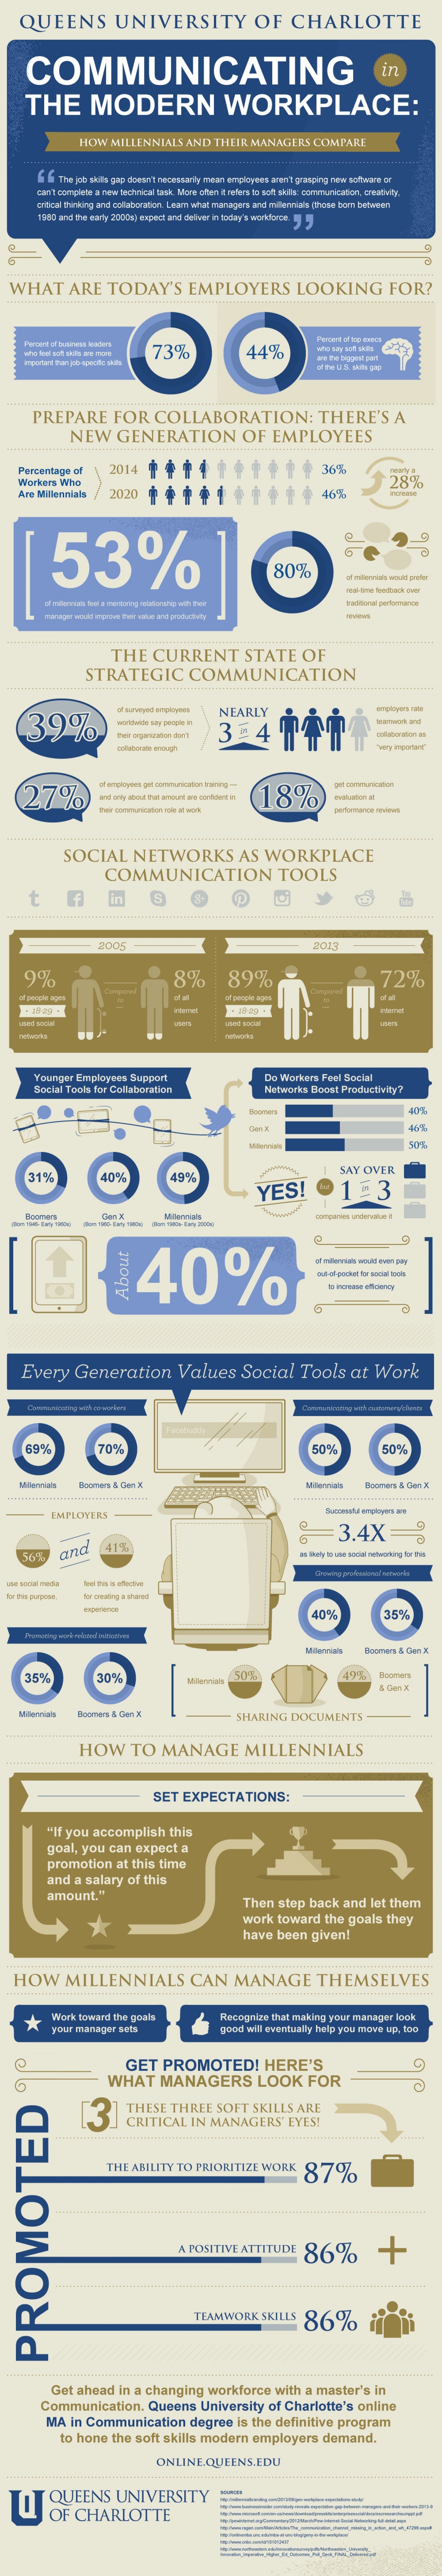 Millennials in the Modern Workplace Infographic